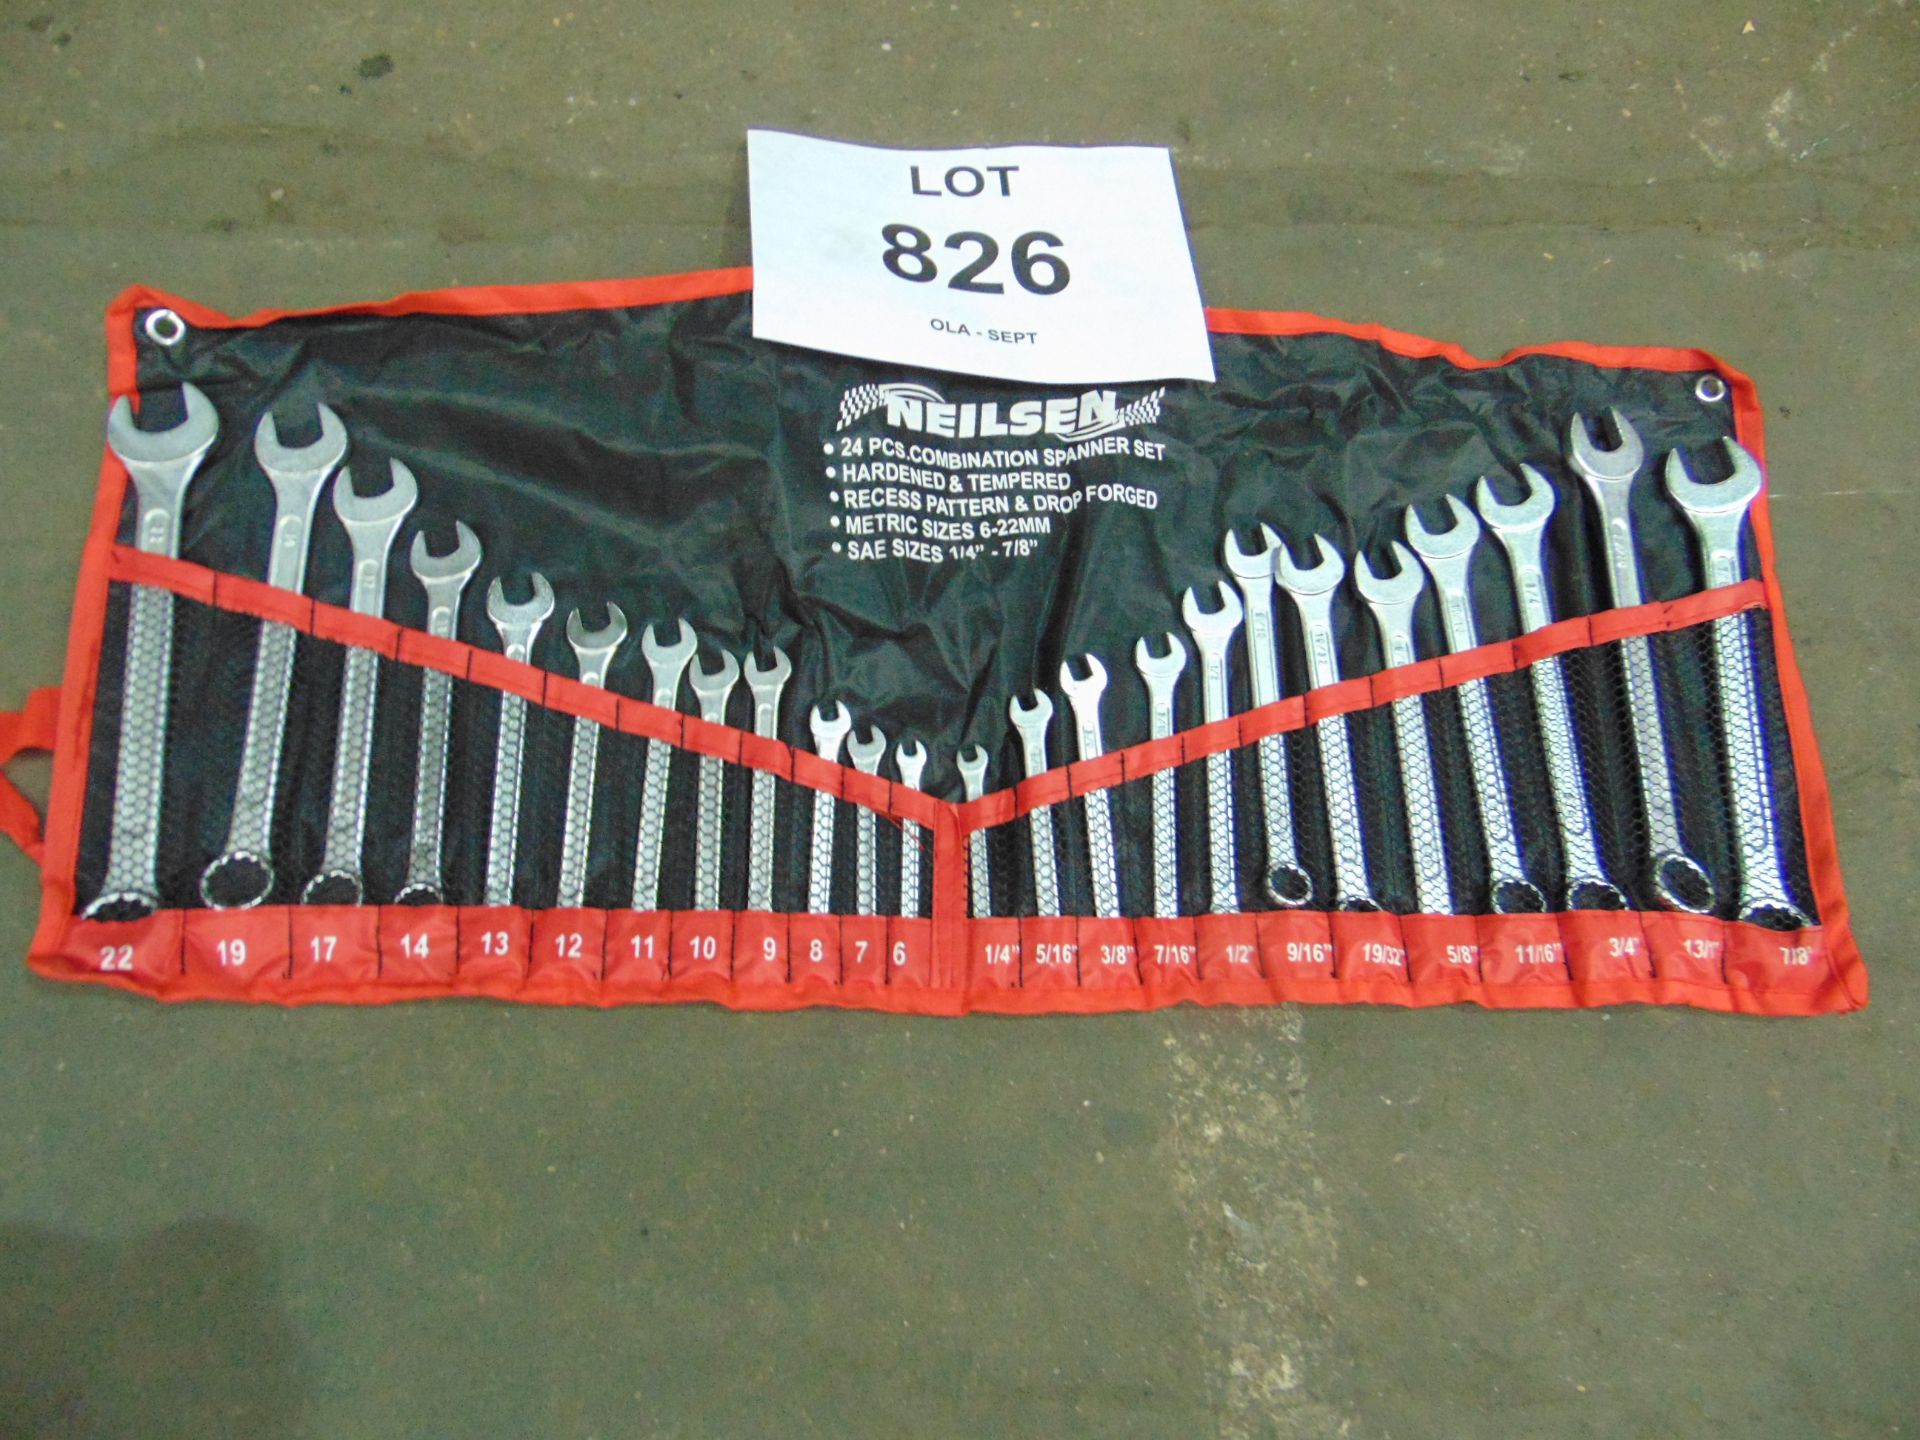 Unused 25 Set of Combination Spanners as Shown